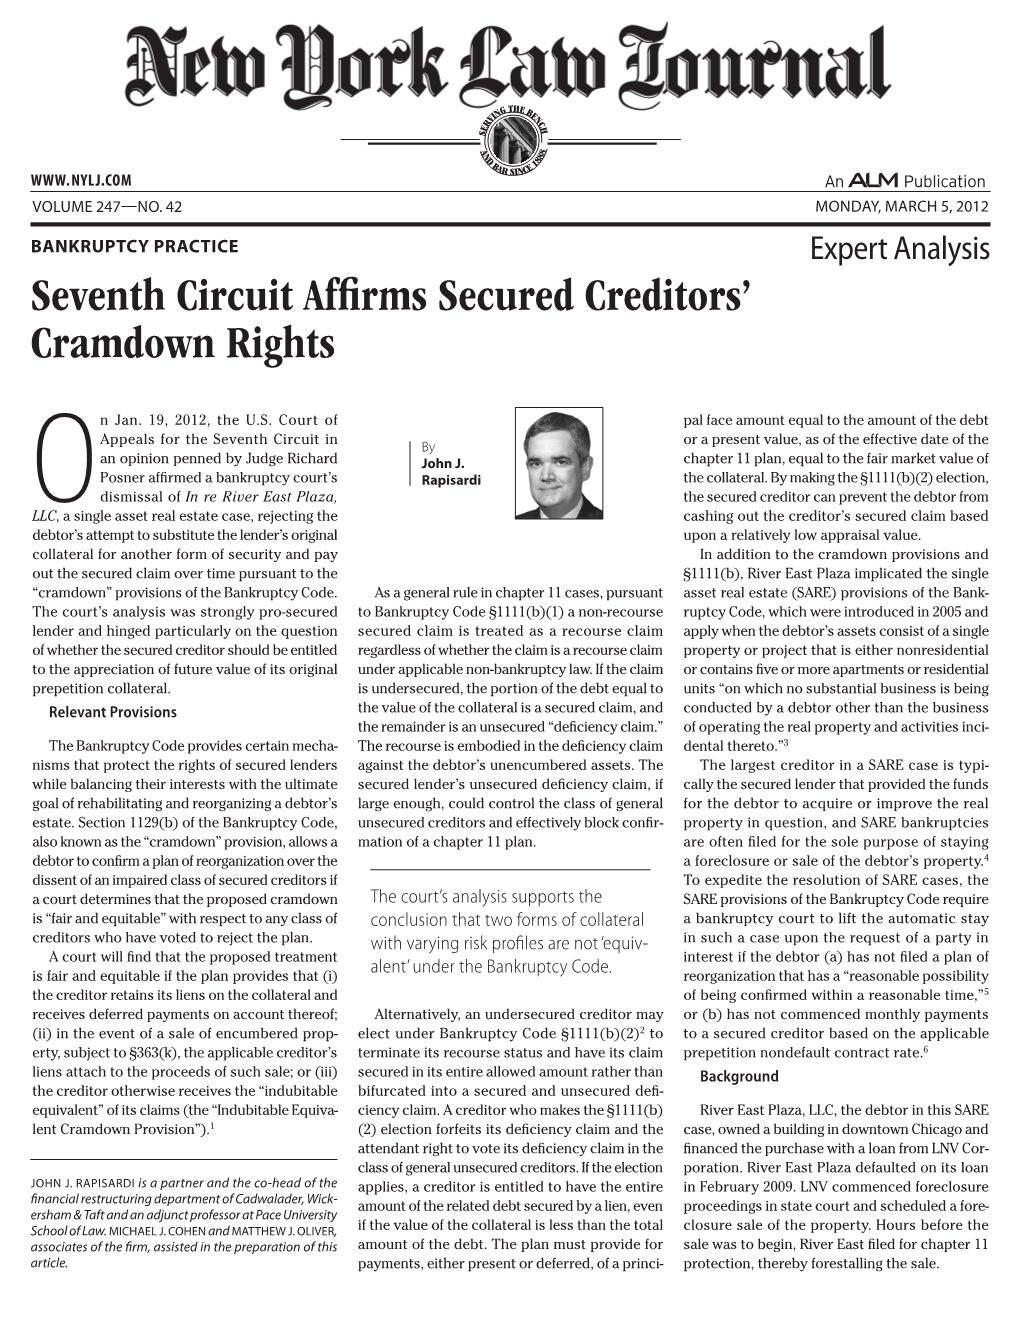 Seventh Circuit Affirms Secured Creditors' Cramdown Rights